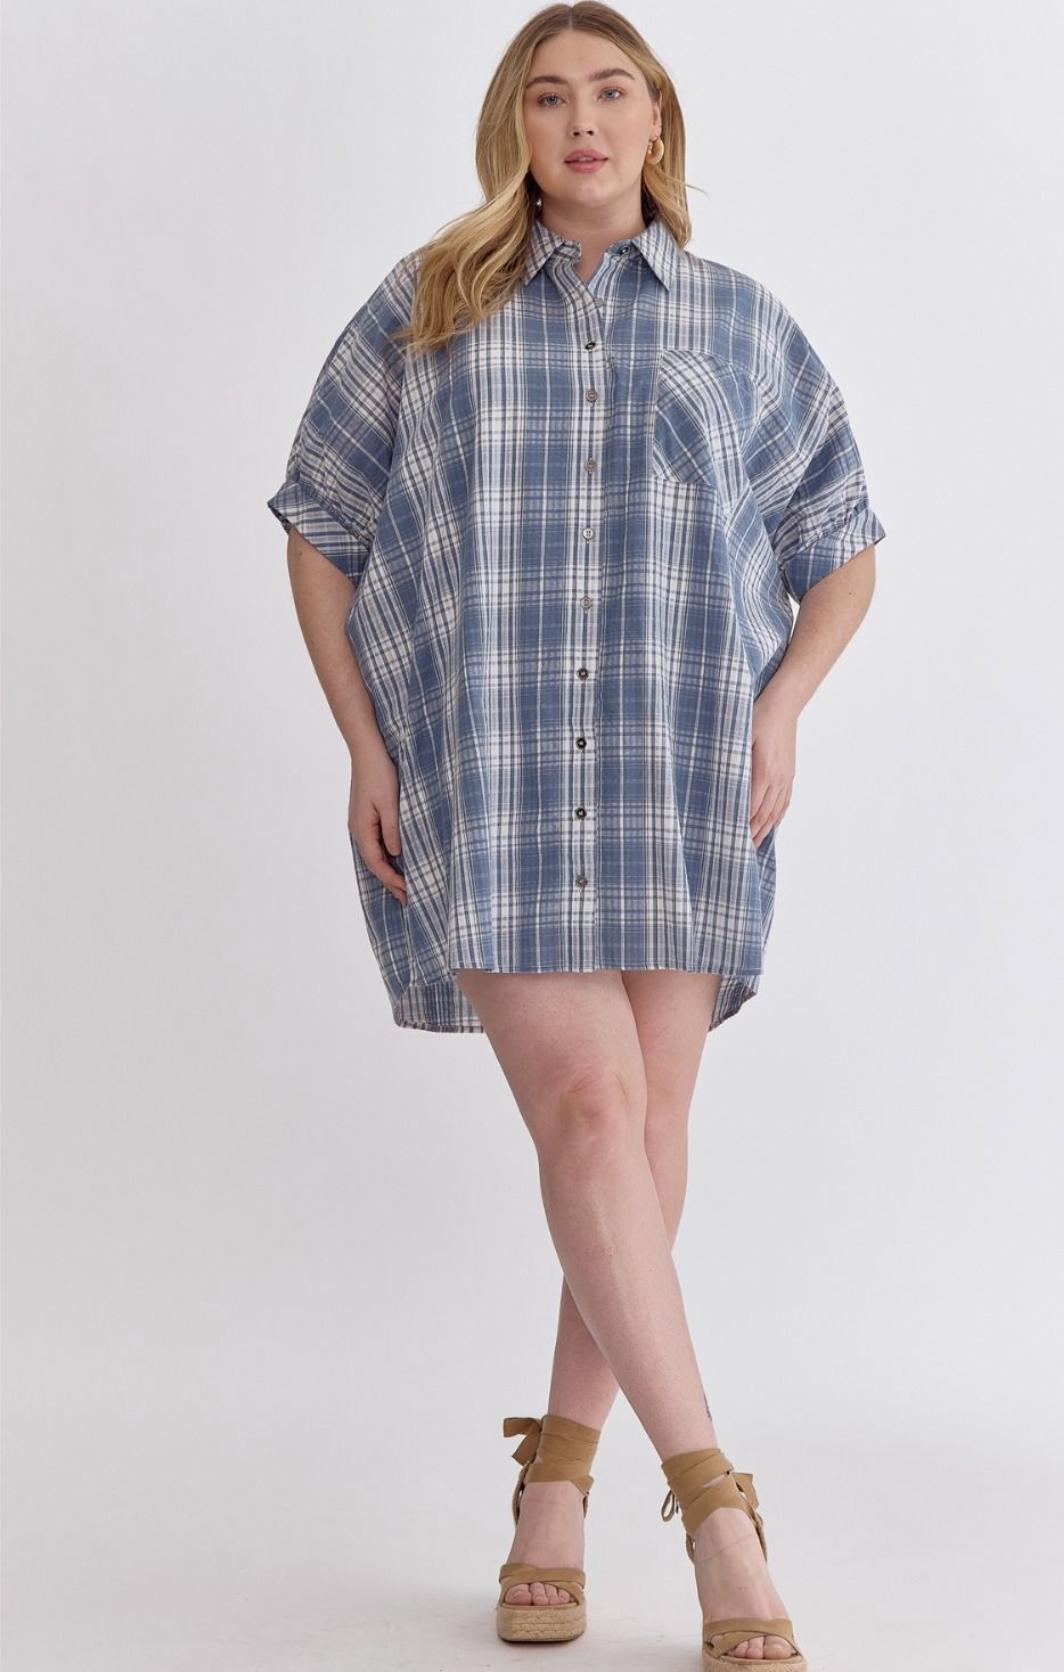 Curvy Get Together Plaid Chambray Dress